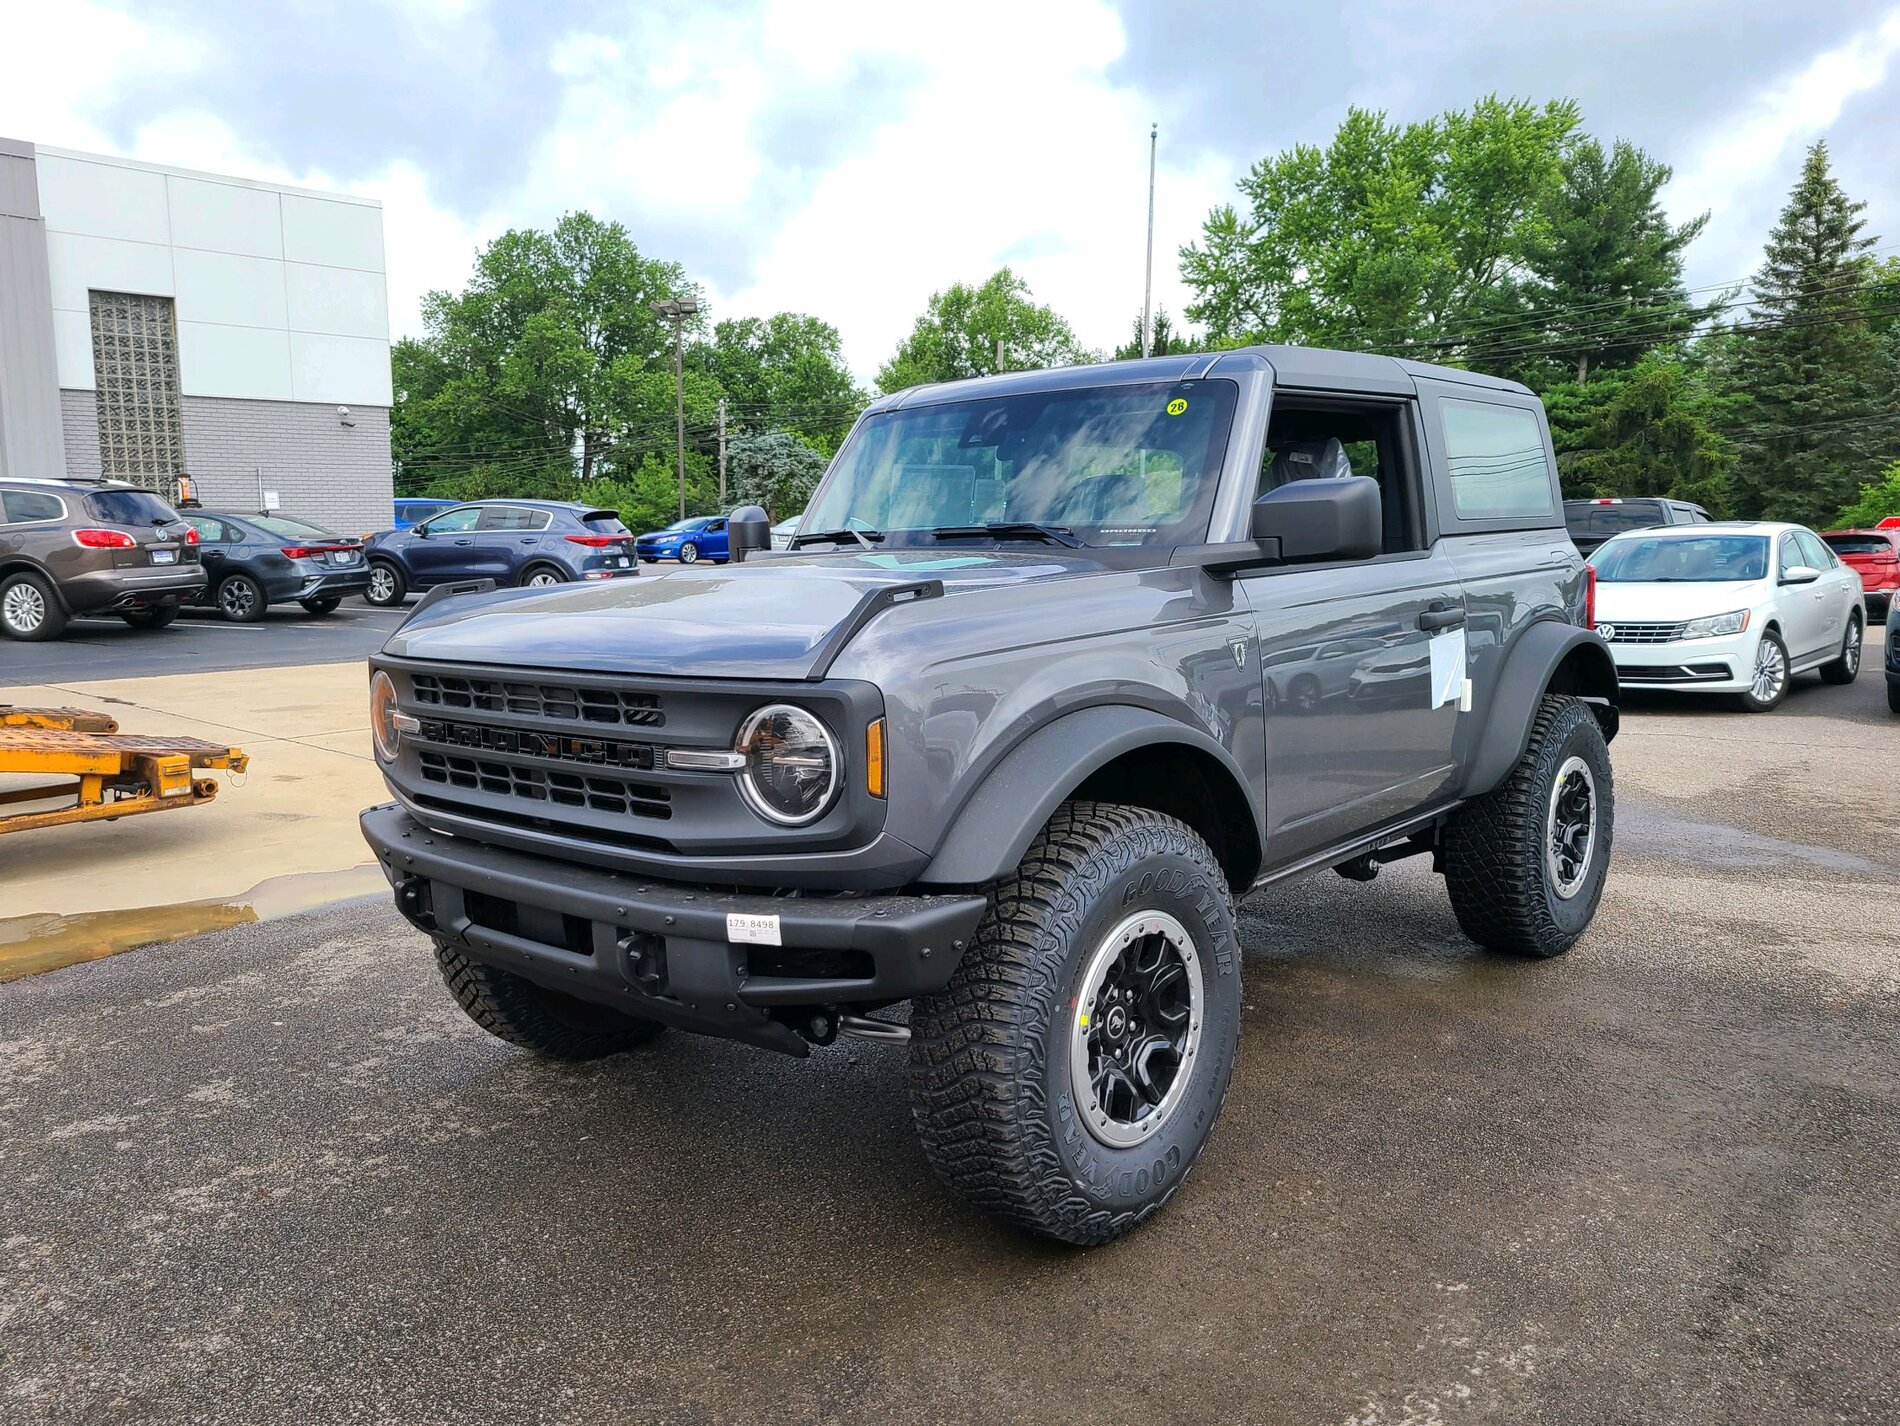 Ford Bronco BaseSquatch DELIVERED : 2 Door Base Sasquatch [UPDATE - NOW WITH MORE PICTURES & REVIEW] BD10B042-22C0-46E7-B392-F2B70A455E33